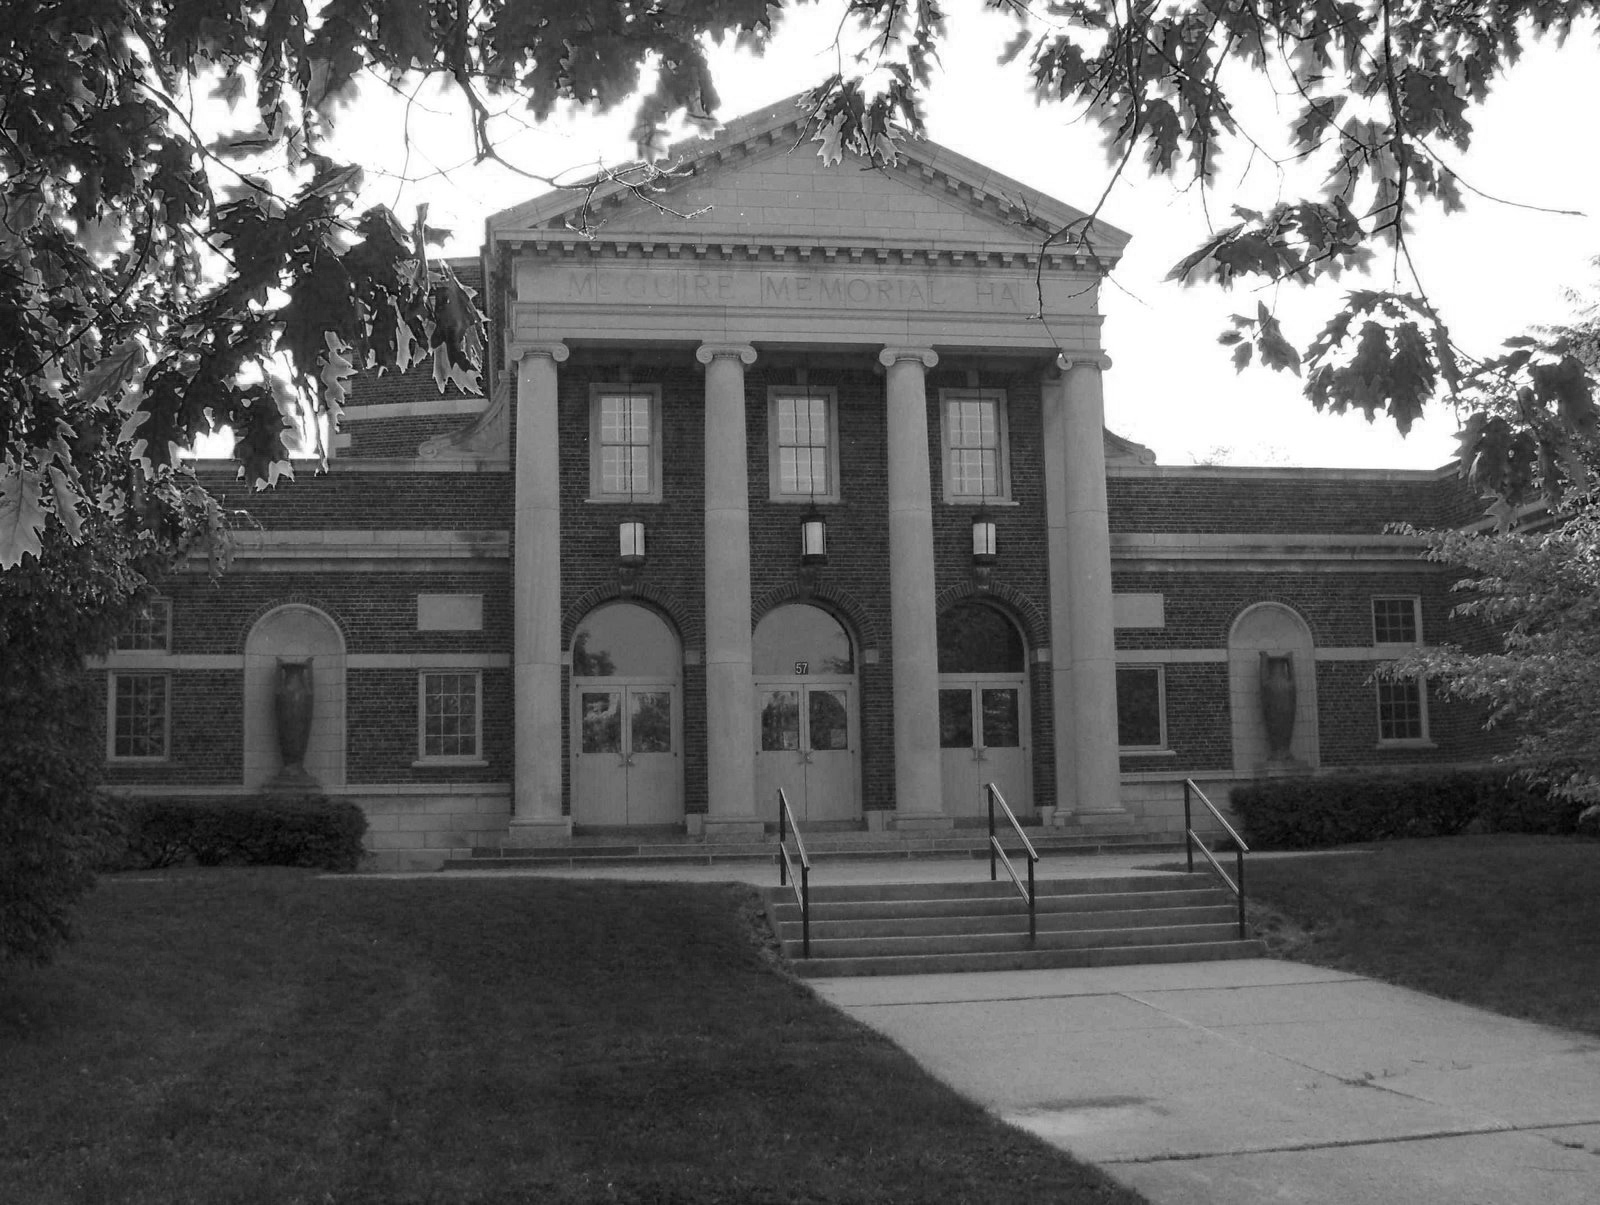   RICHMOND ART MUSEUM   RAM is the oldest cultural institution in Wayne County and the second oldest art museum in Indiana. &nbsp;Ahead of the national trend, the museum has remained free of admission since its beginning.  More than an Art Museum.   